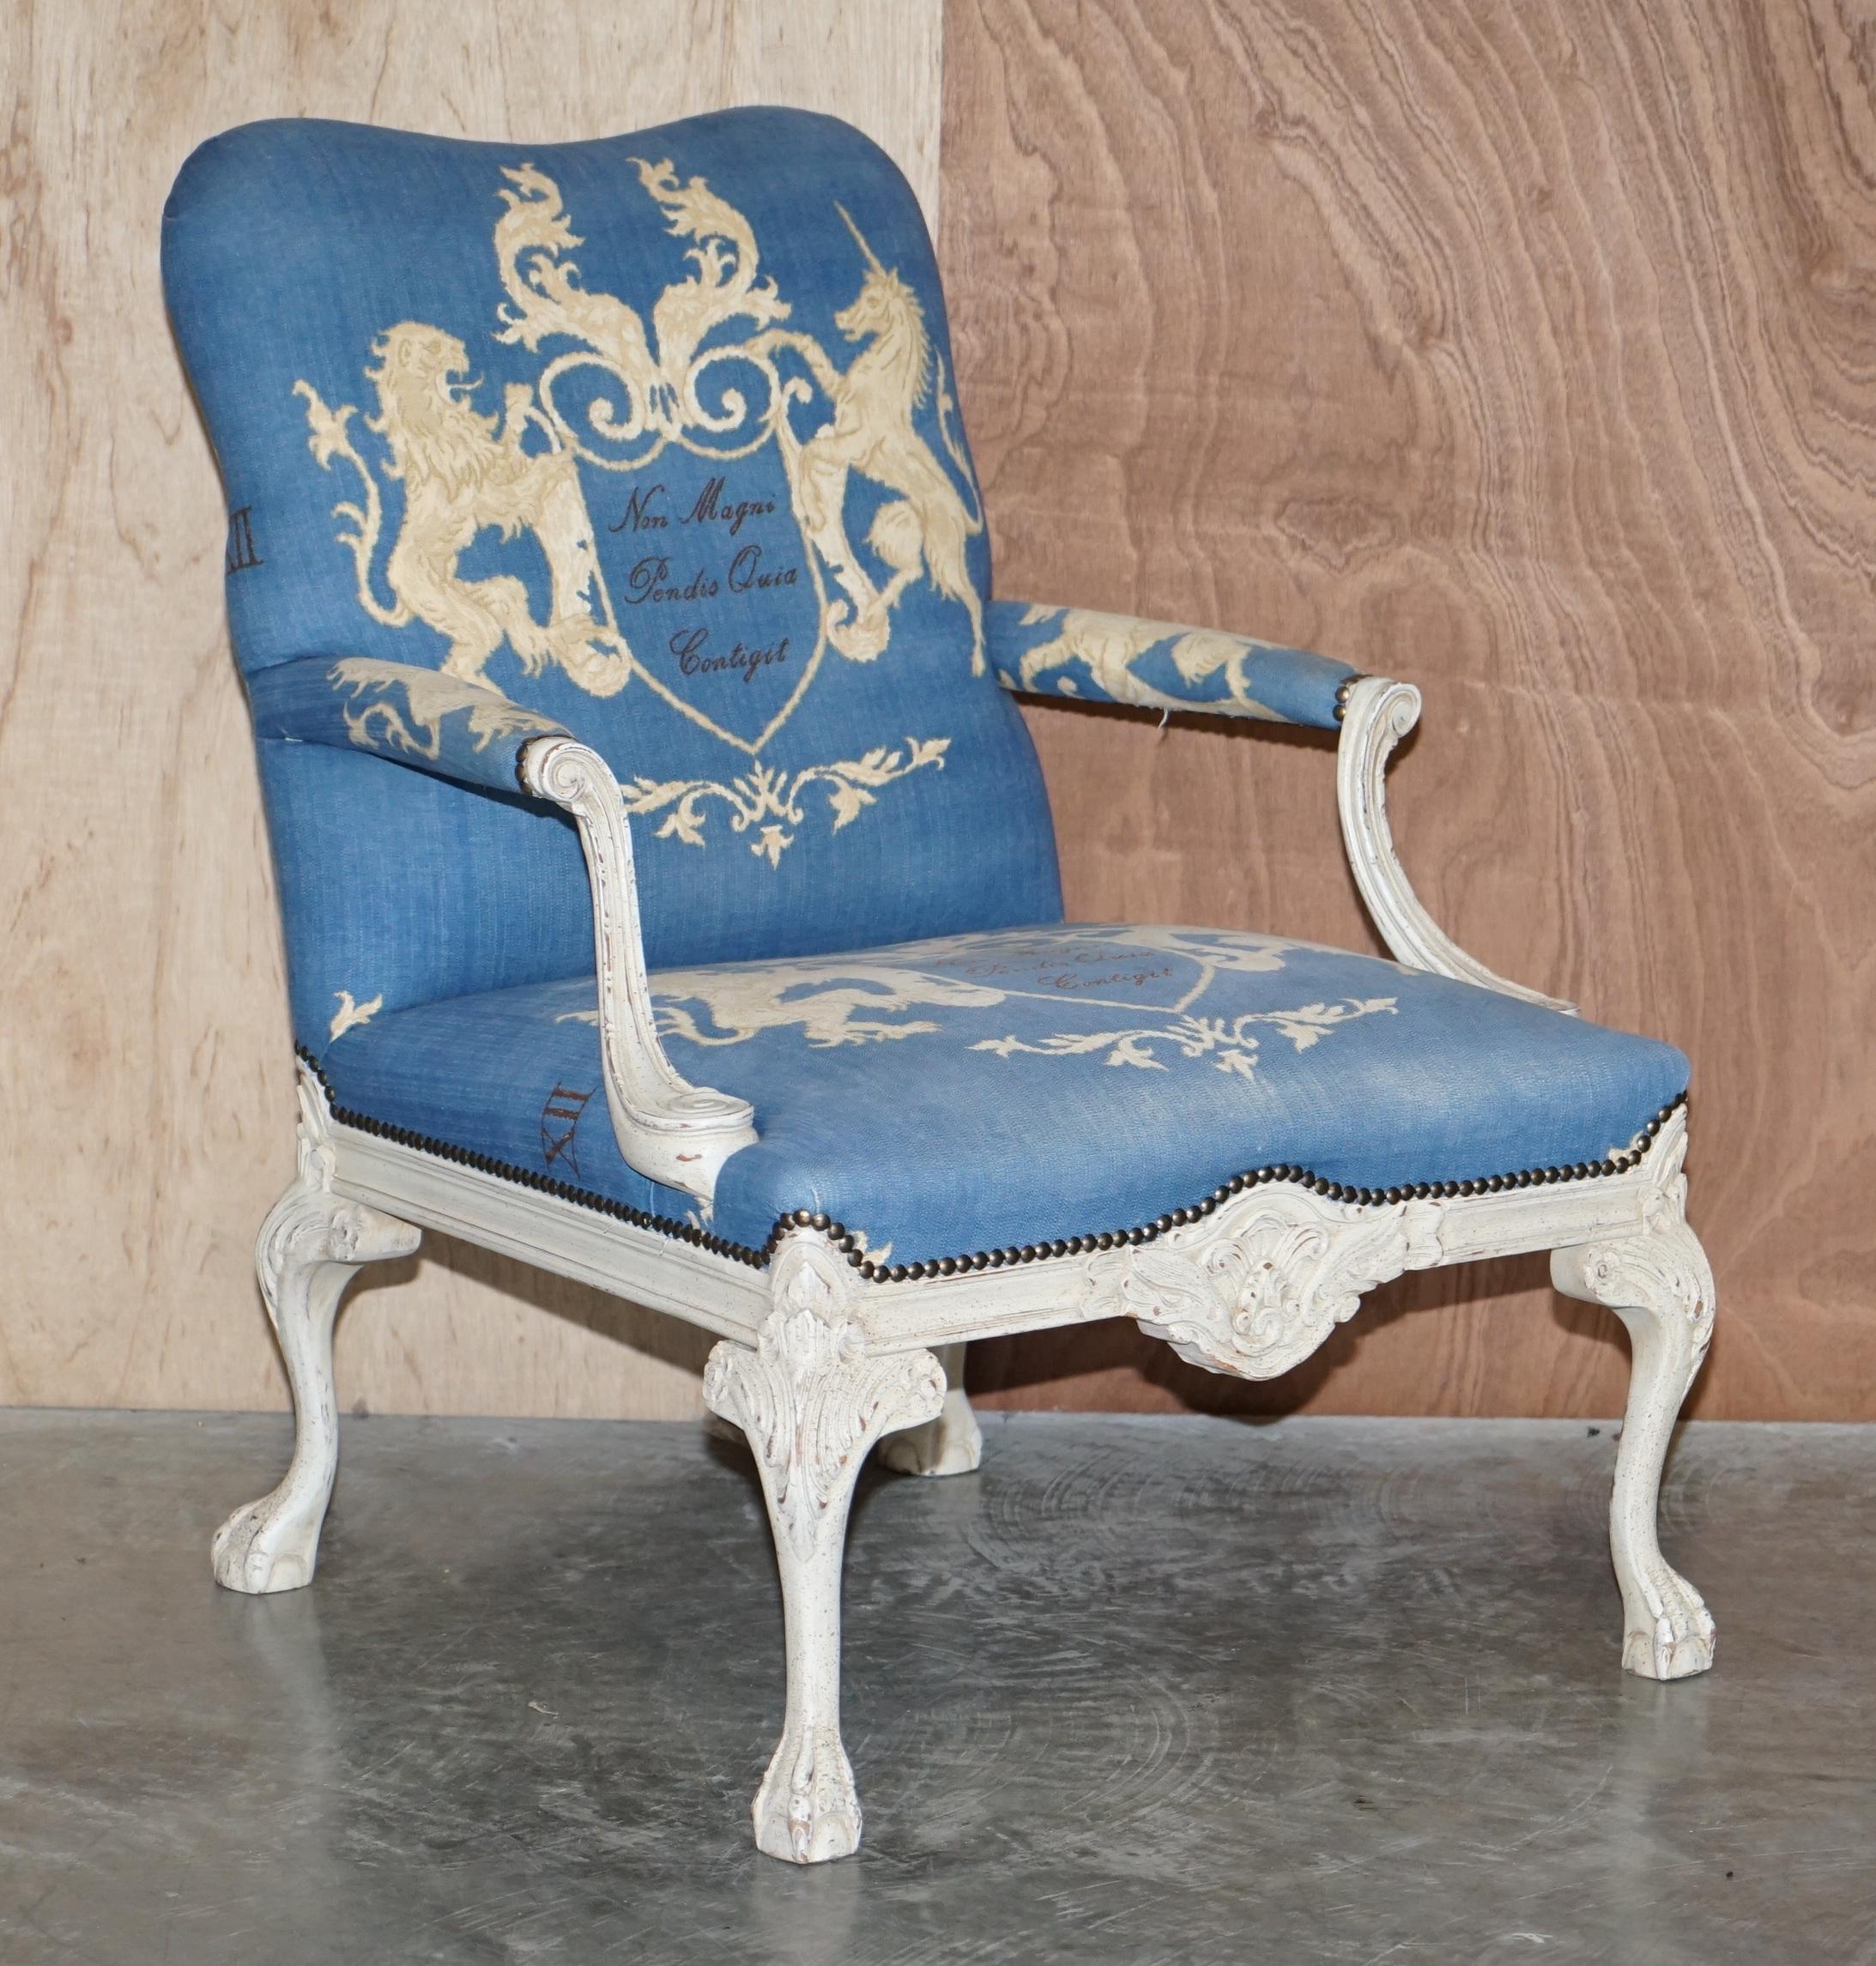 We are delighted to offer for sale these stunning vintage Italian hand carved armchairs with antiqued paint finish, Claw & Ball feet and Armorial Crest, Coat of Arms upholstery 

These chairs are simply exquisite, the upholstery is covered in